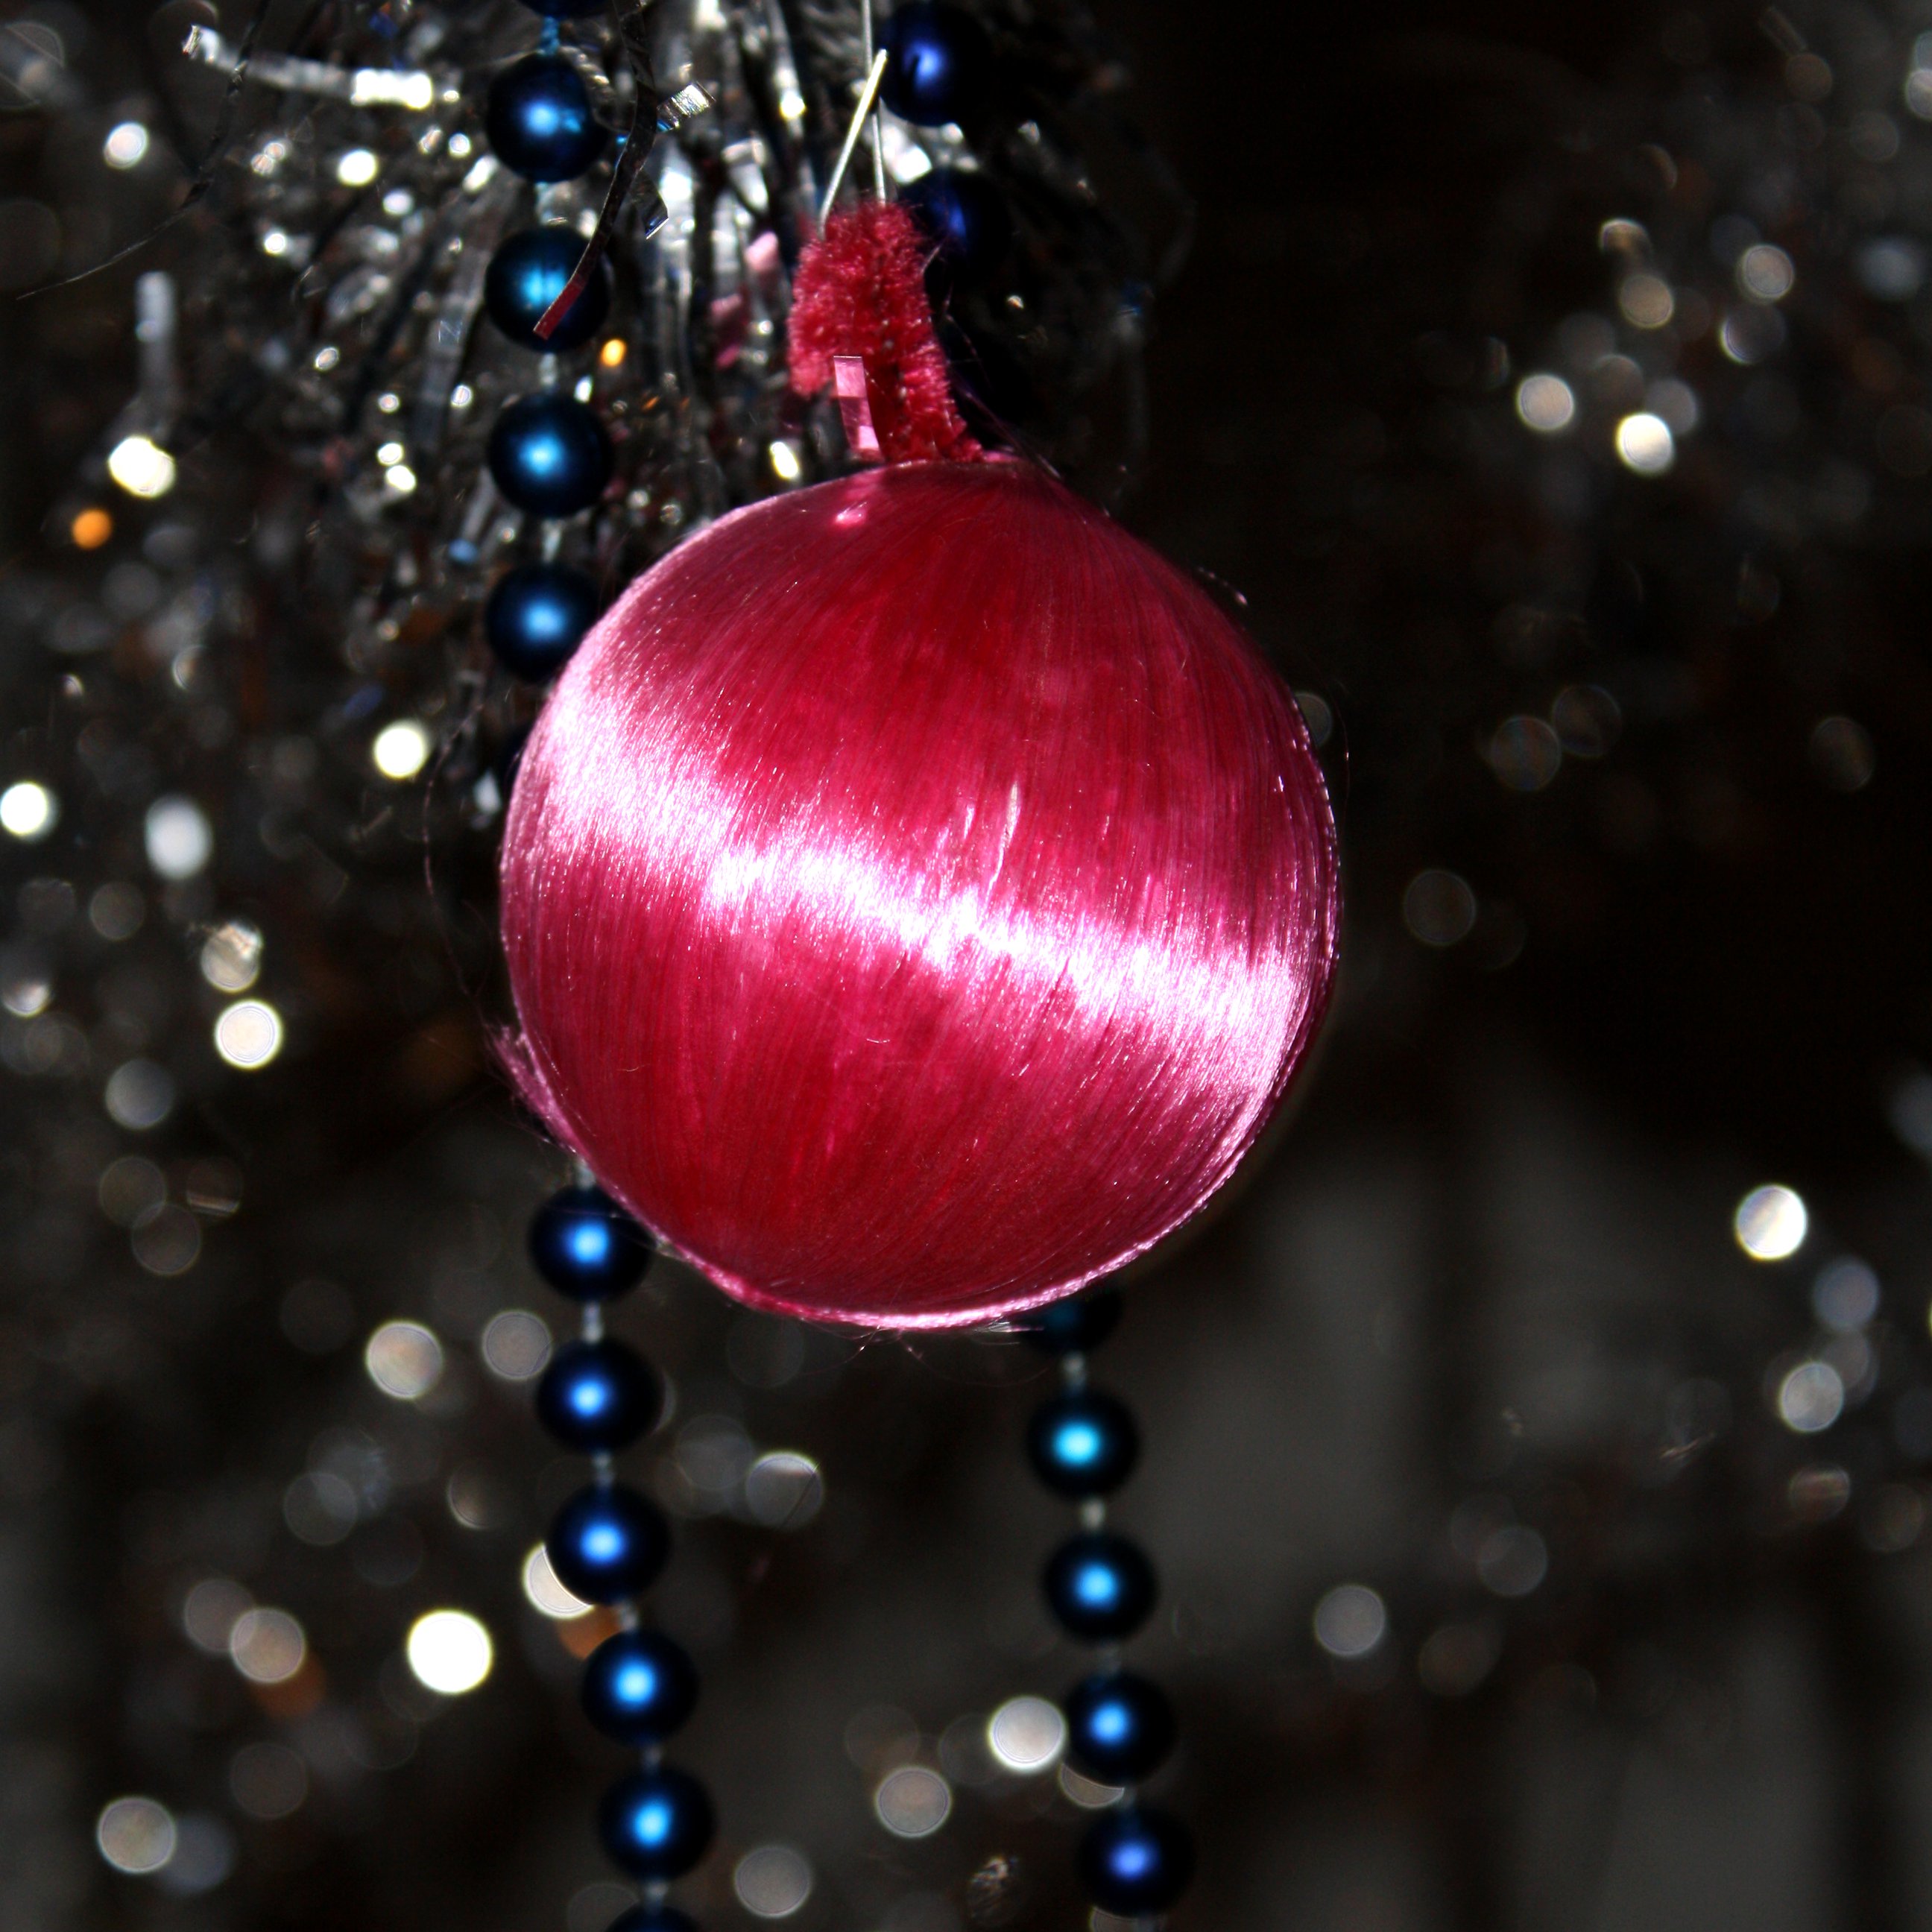 Pink Christmas Ball Ornament Picture Free Photograph Photos Public 